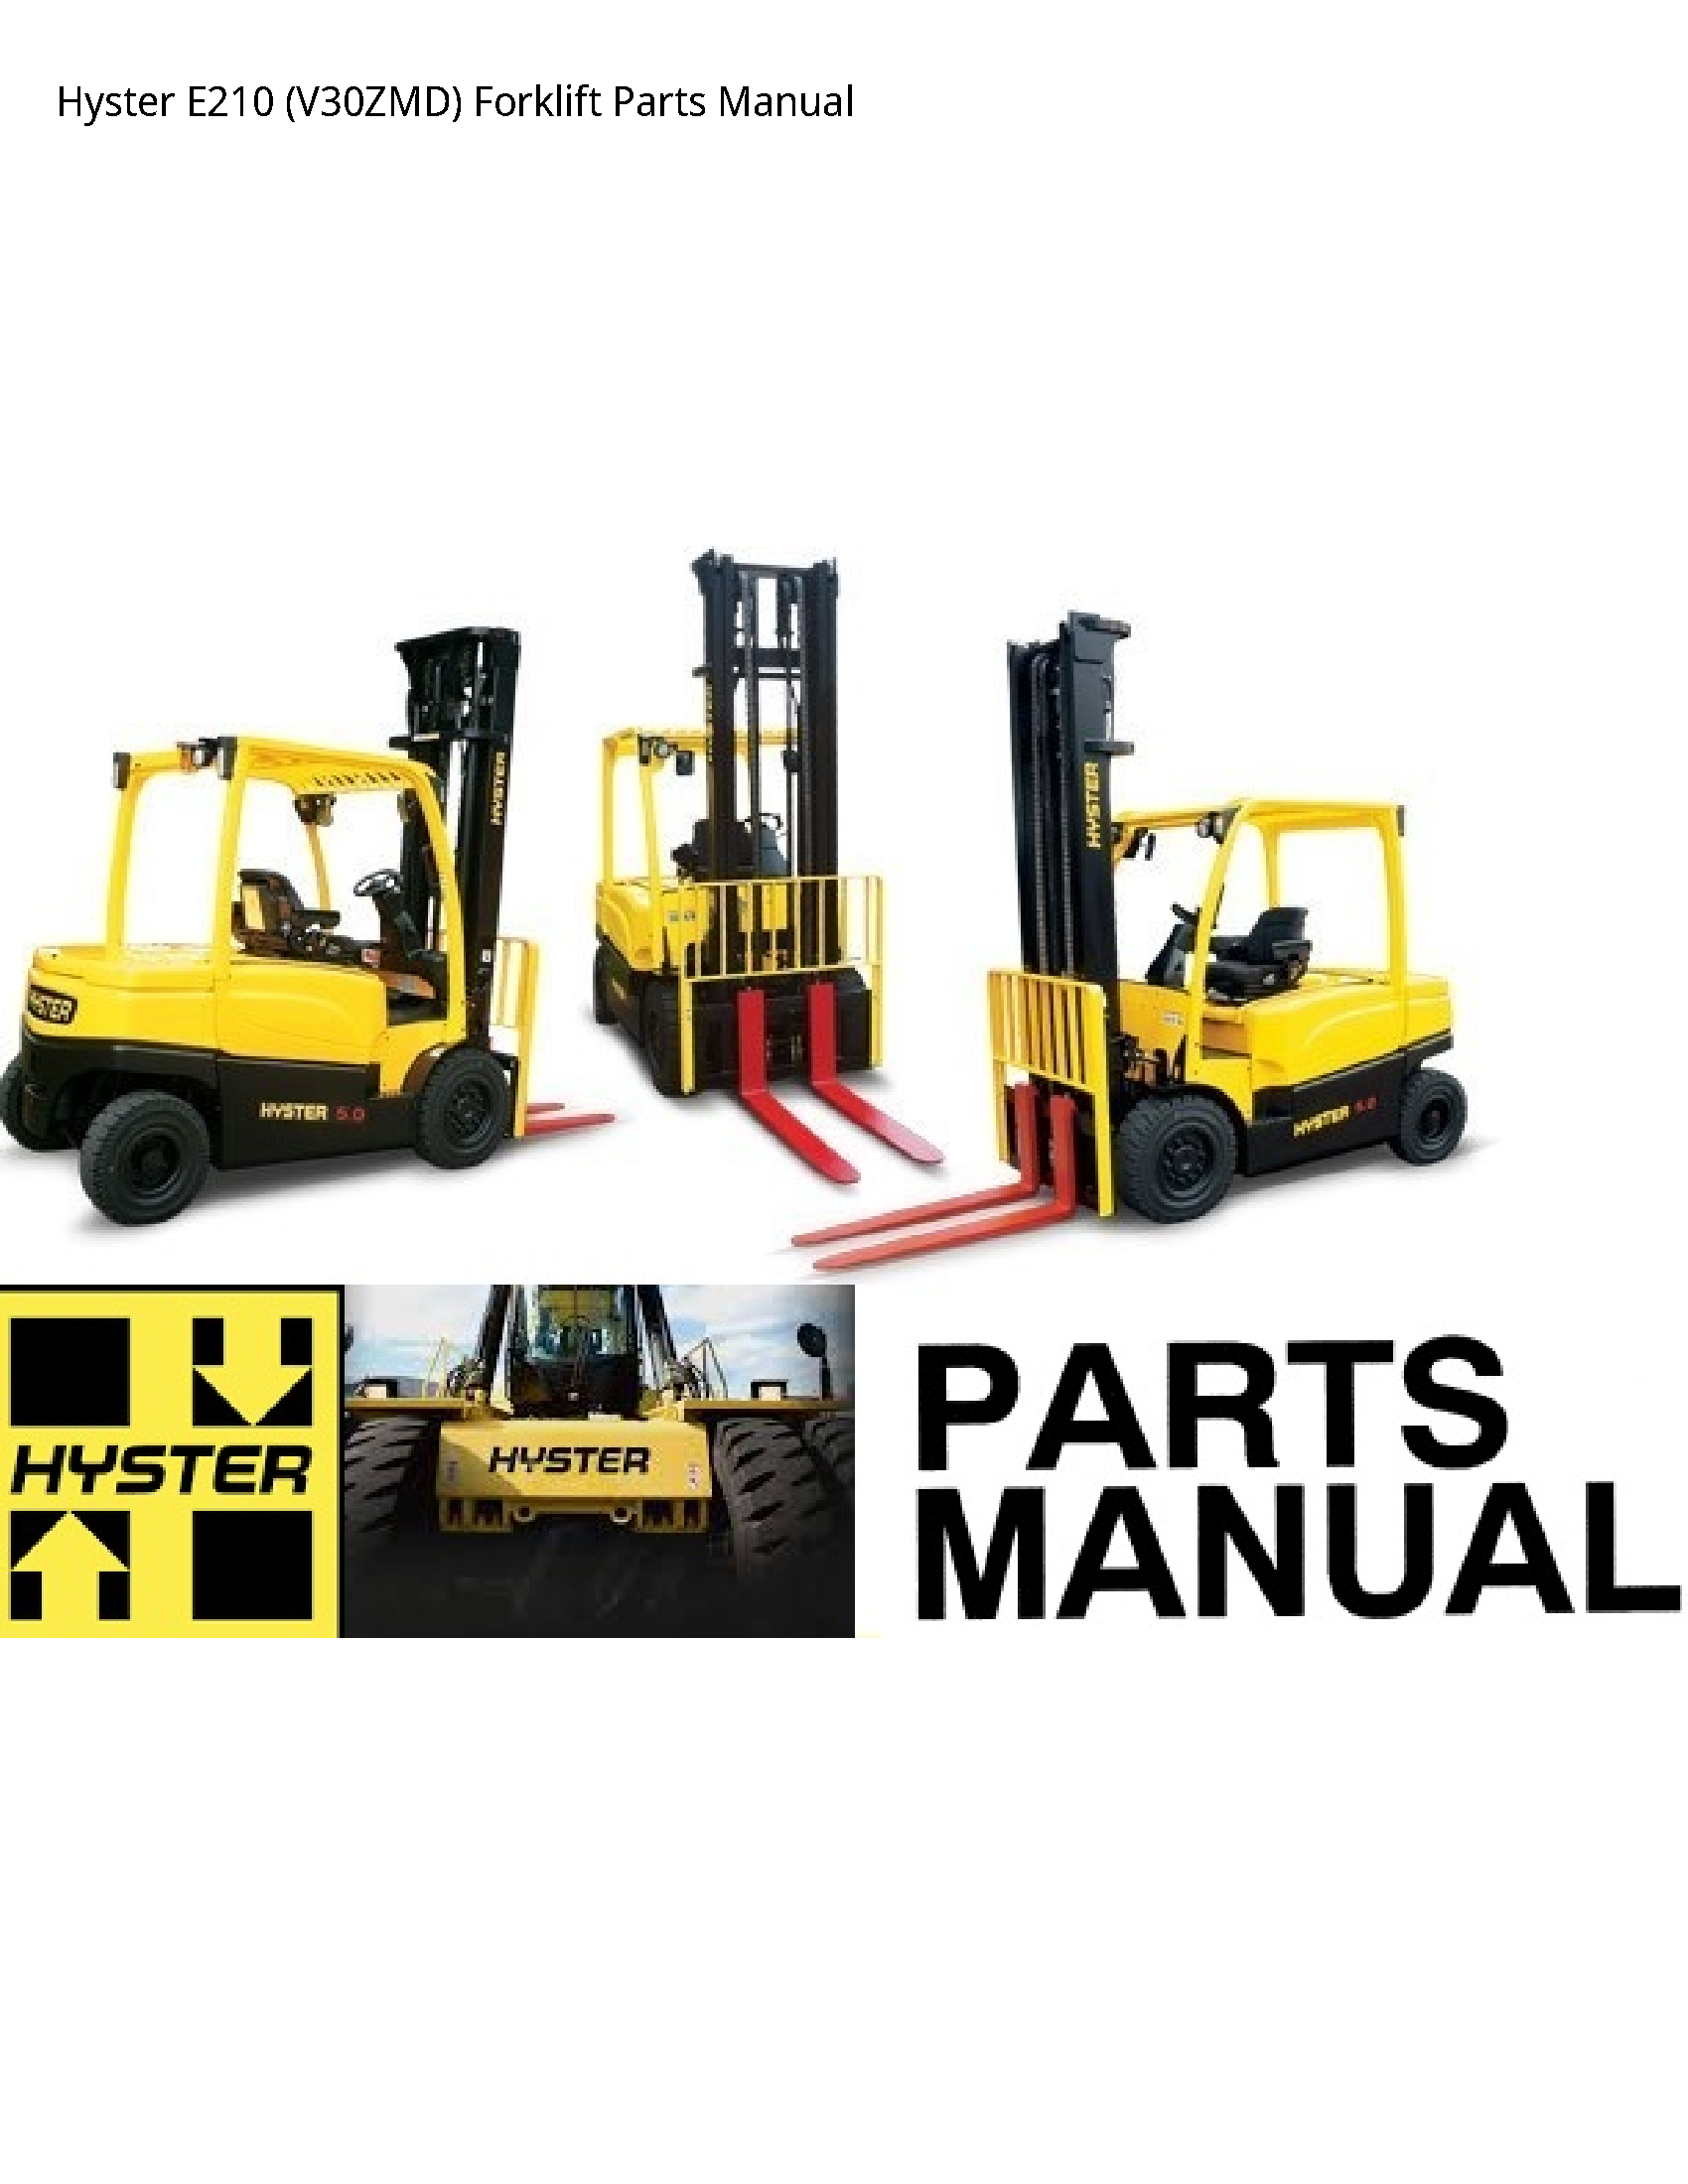 Hyster E210 Forklift Parts manual